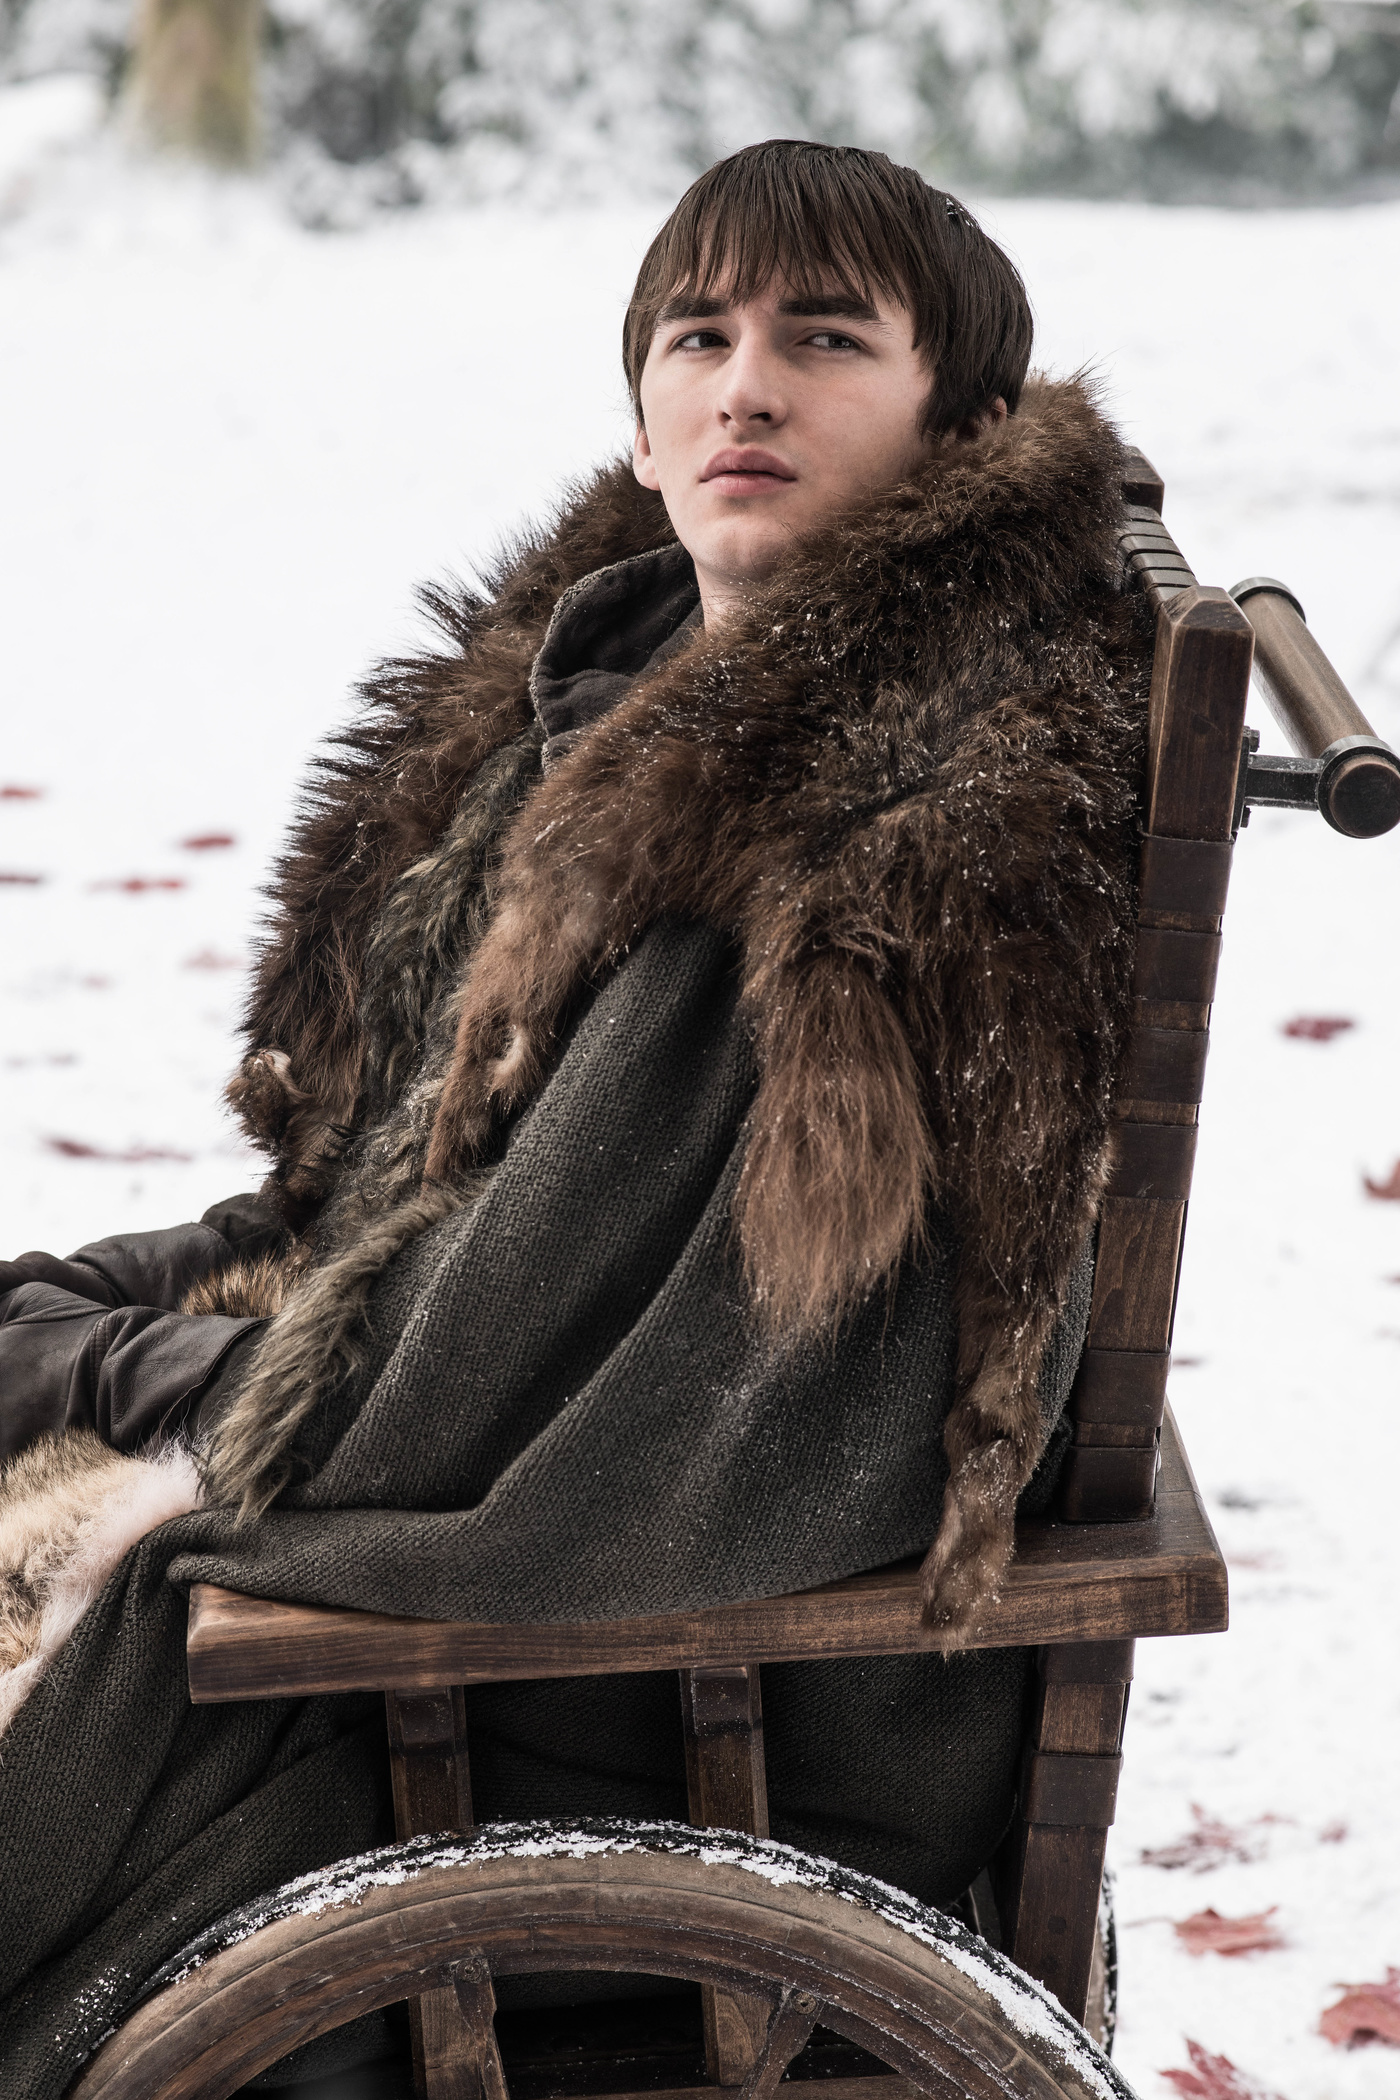 Bran Stark sees past, present and future. (Helen Sloan/HBO)